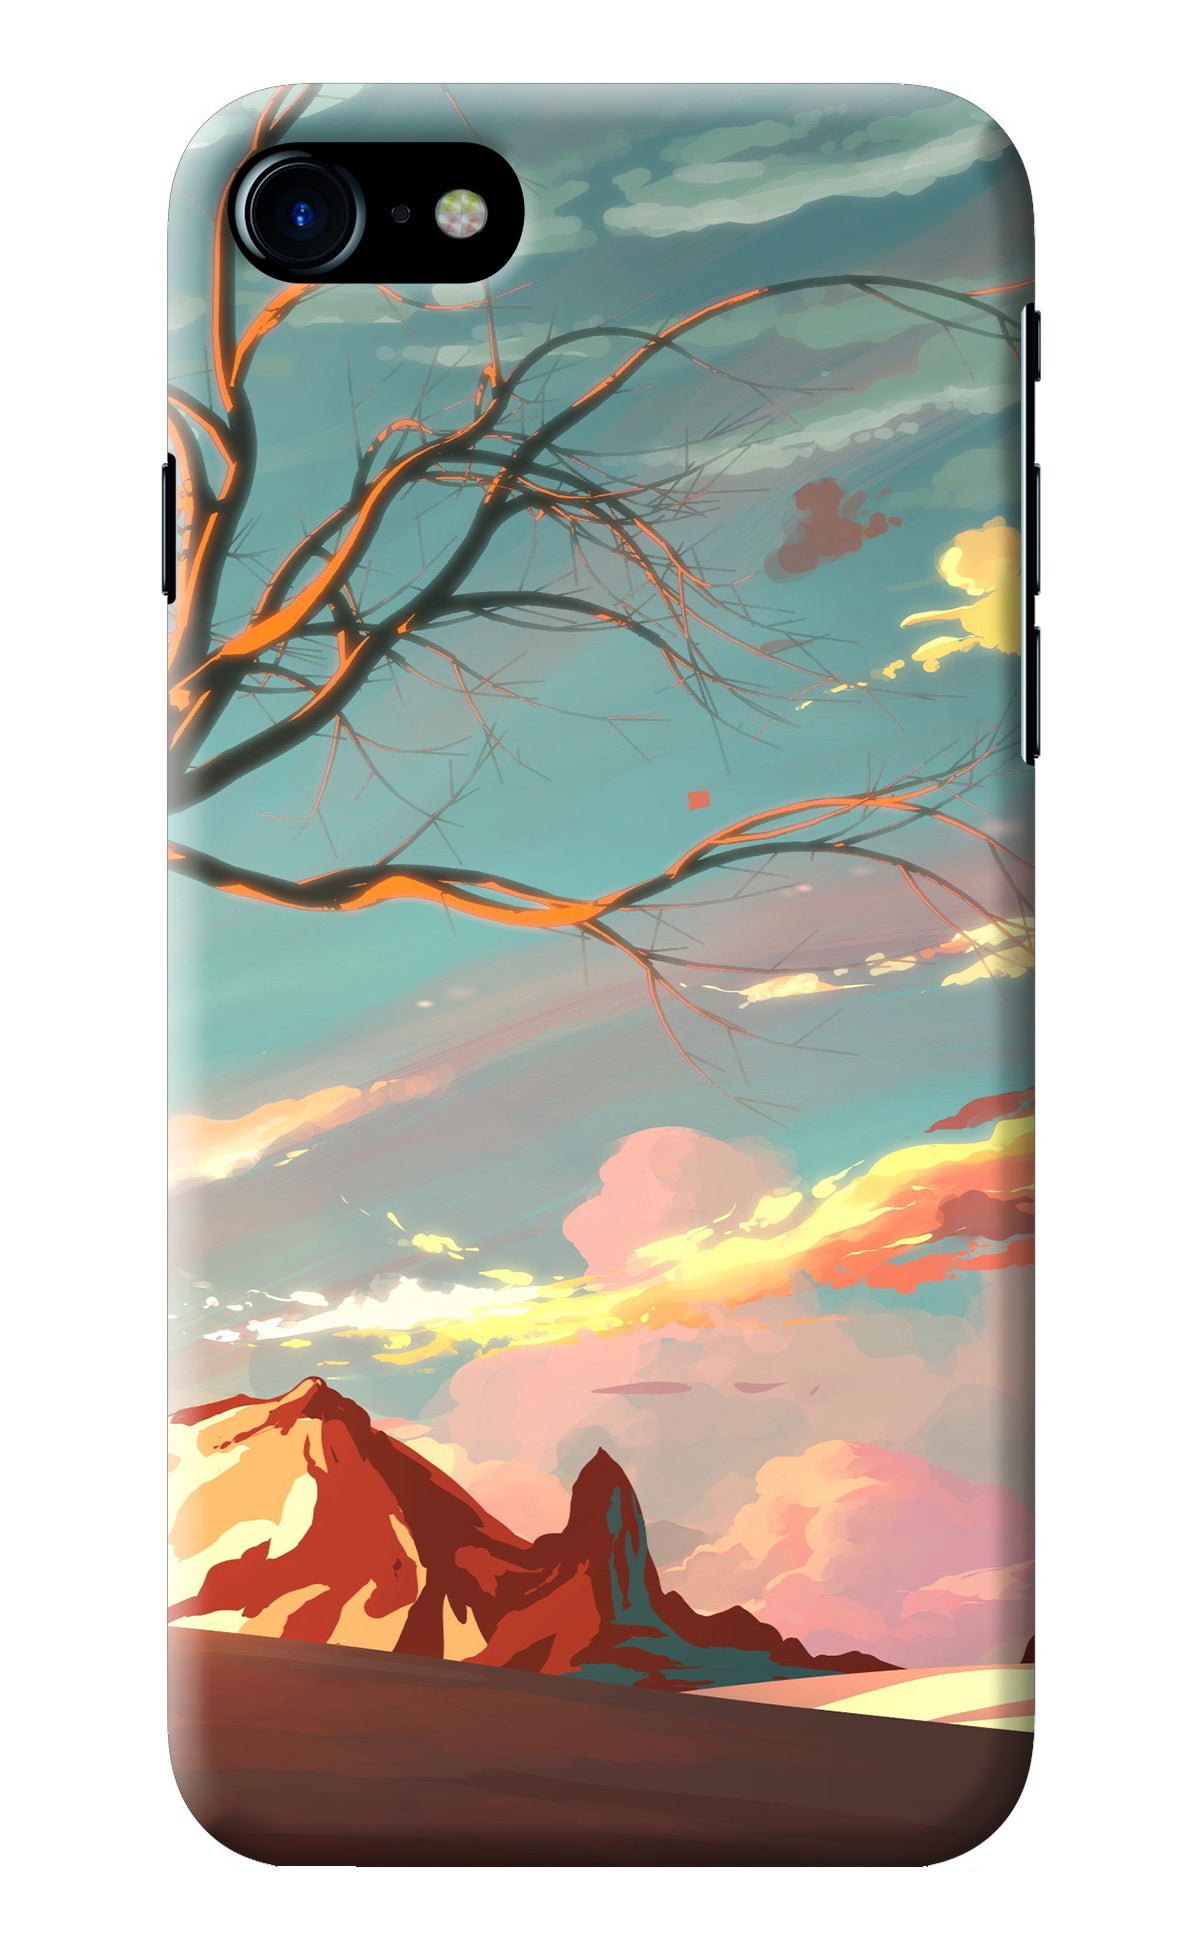 Scenery iPhone 7/7s Back Cover